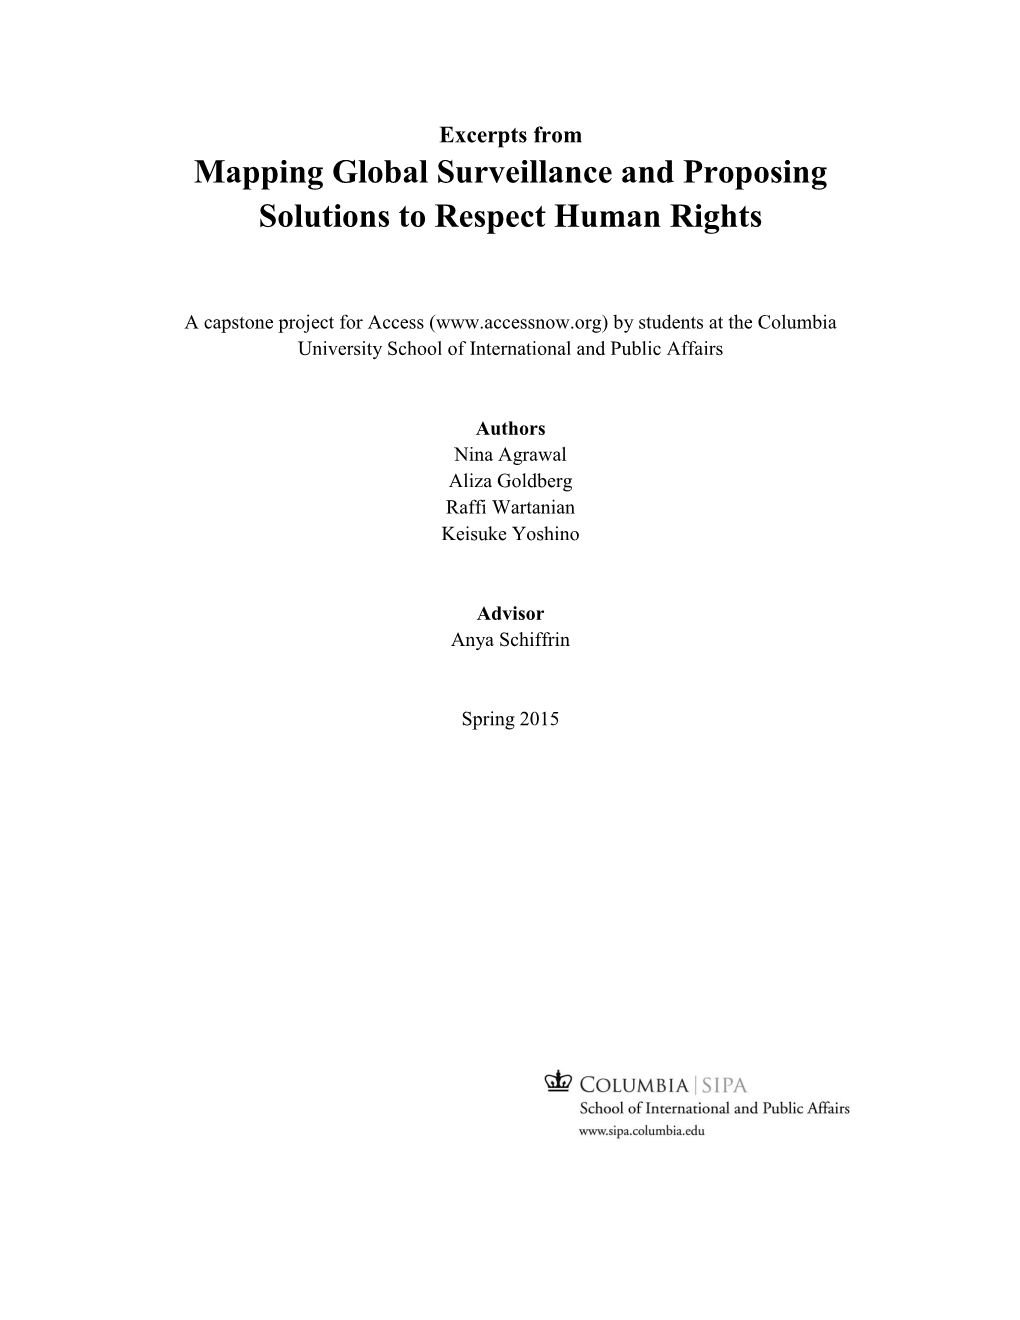 Mapping Global Surveillance and Proposing Solutions to Respect Human Rights